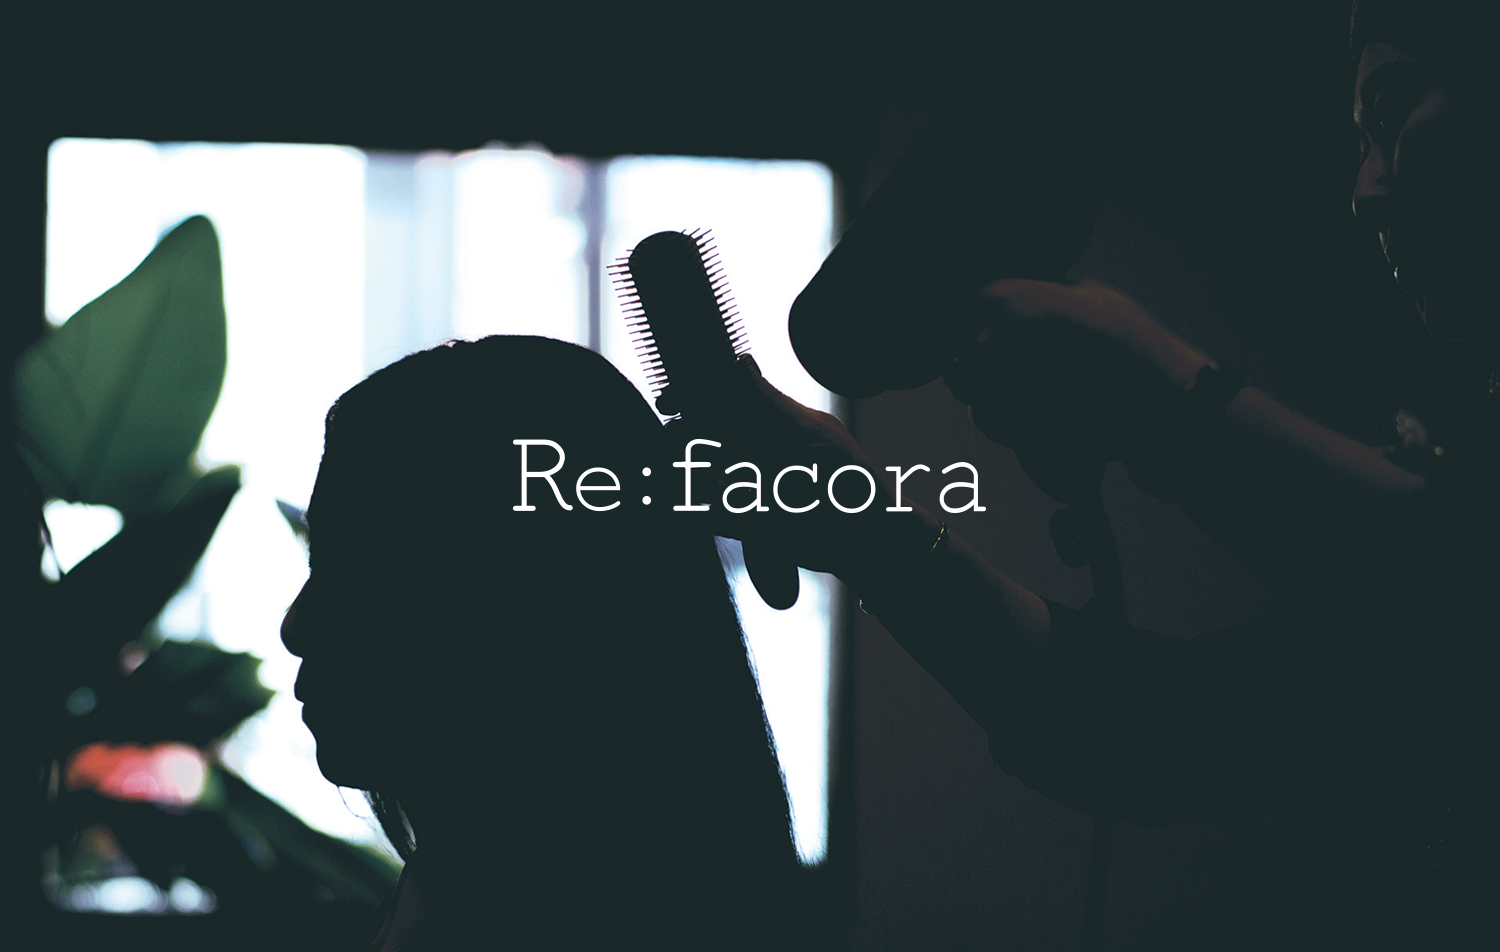 Re:facora パンフレットデザイン